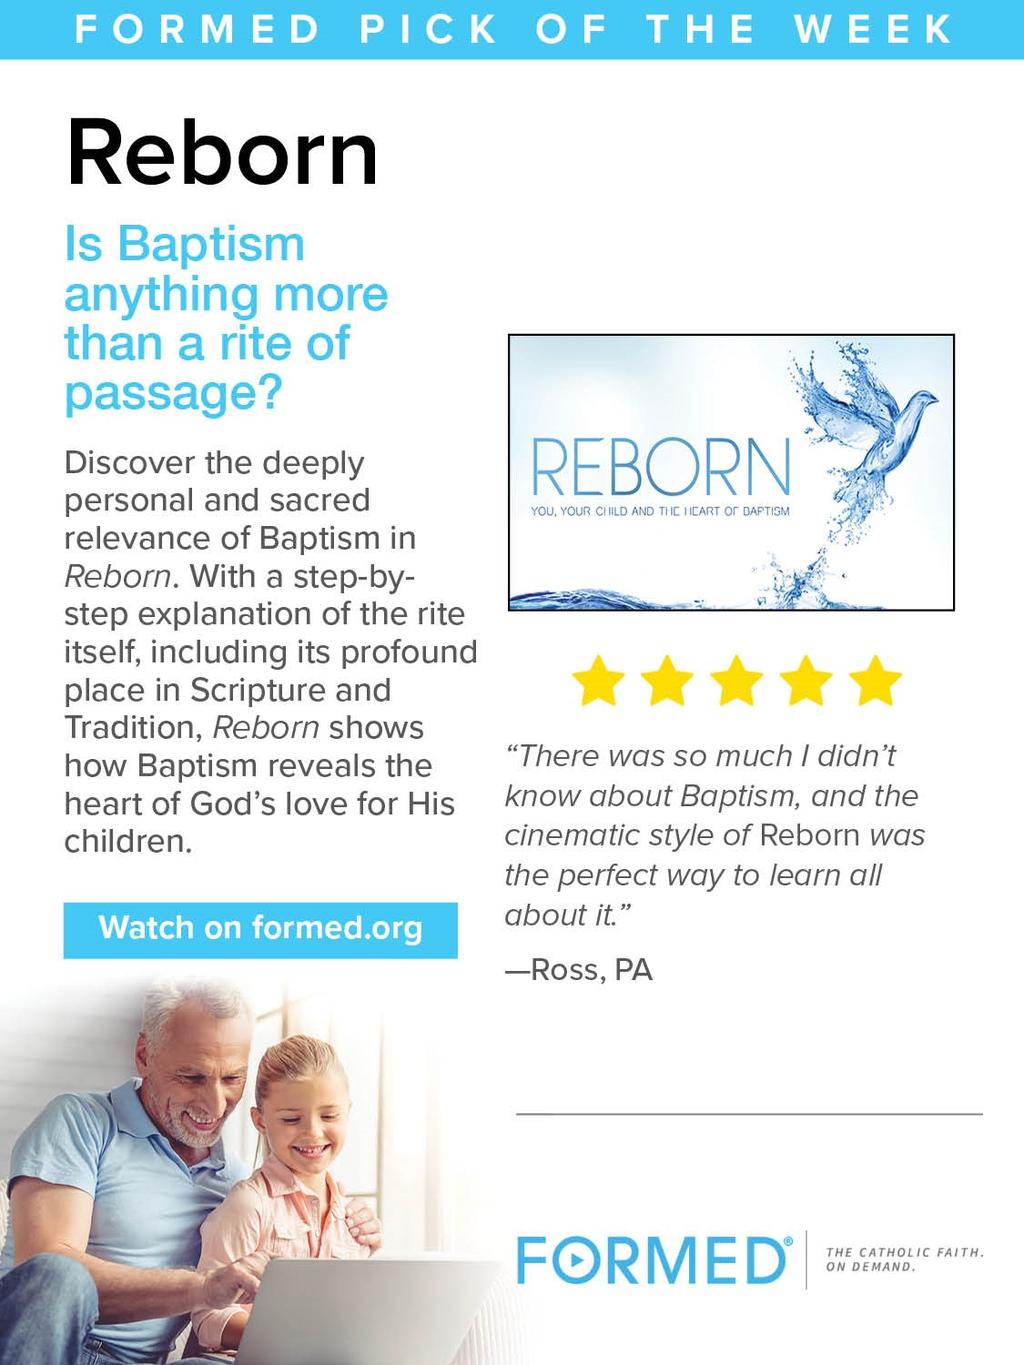 To learn more about the Spiritual Adoption program and how you can help, contact Teresa at teresa.j.smith16@gmail.com. Don t forget about your FREE subscription to Formed.